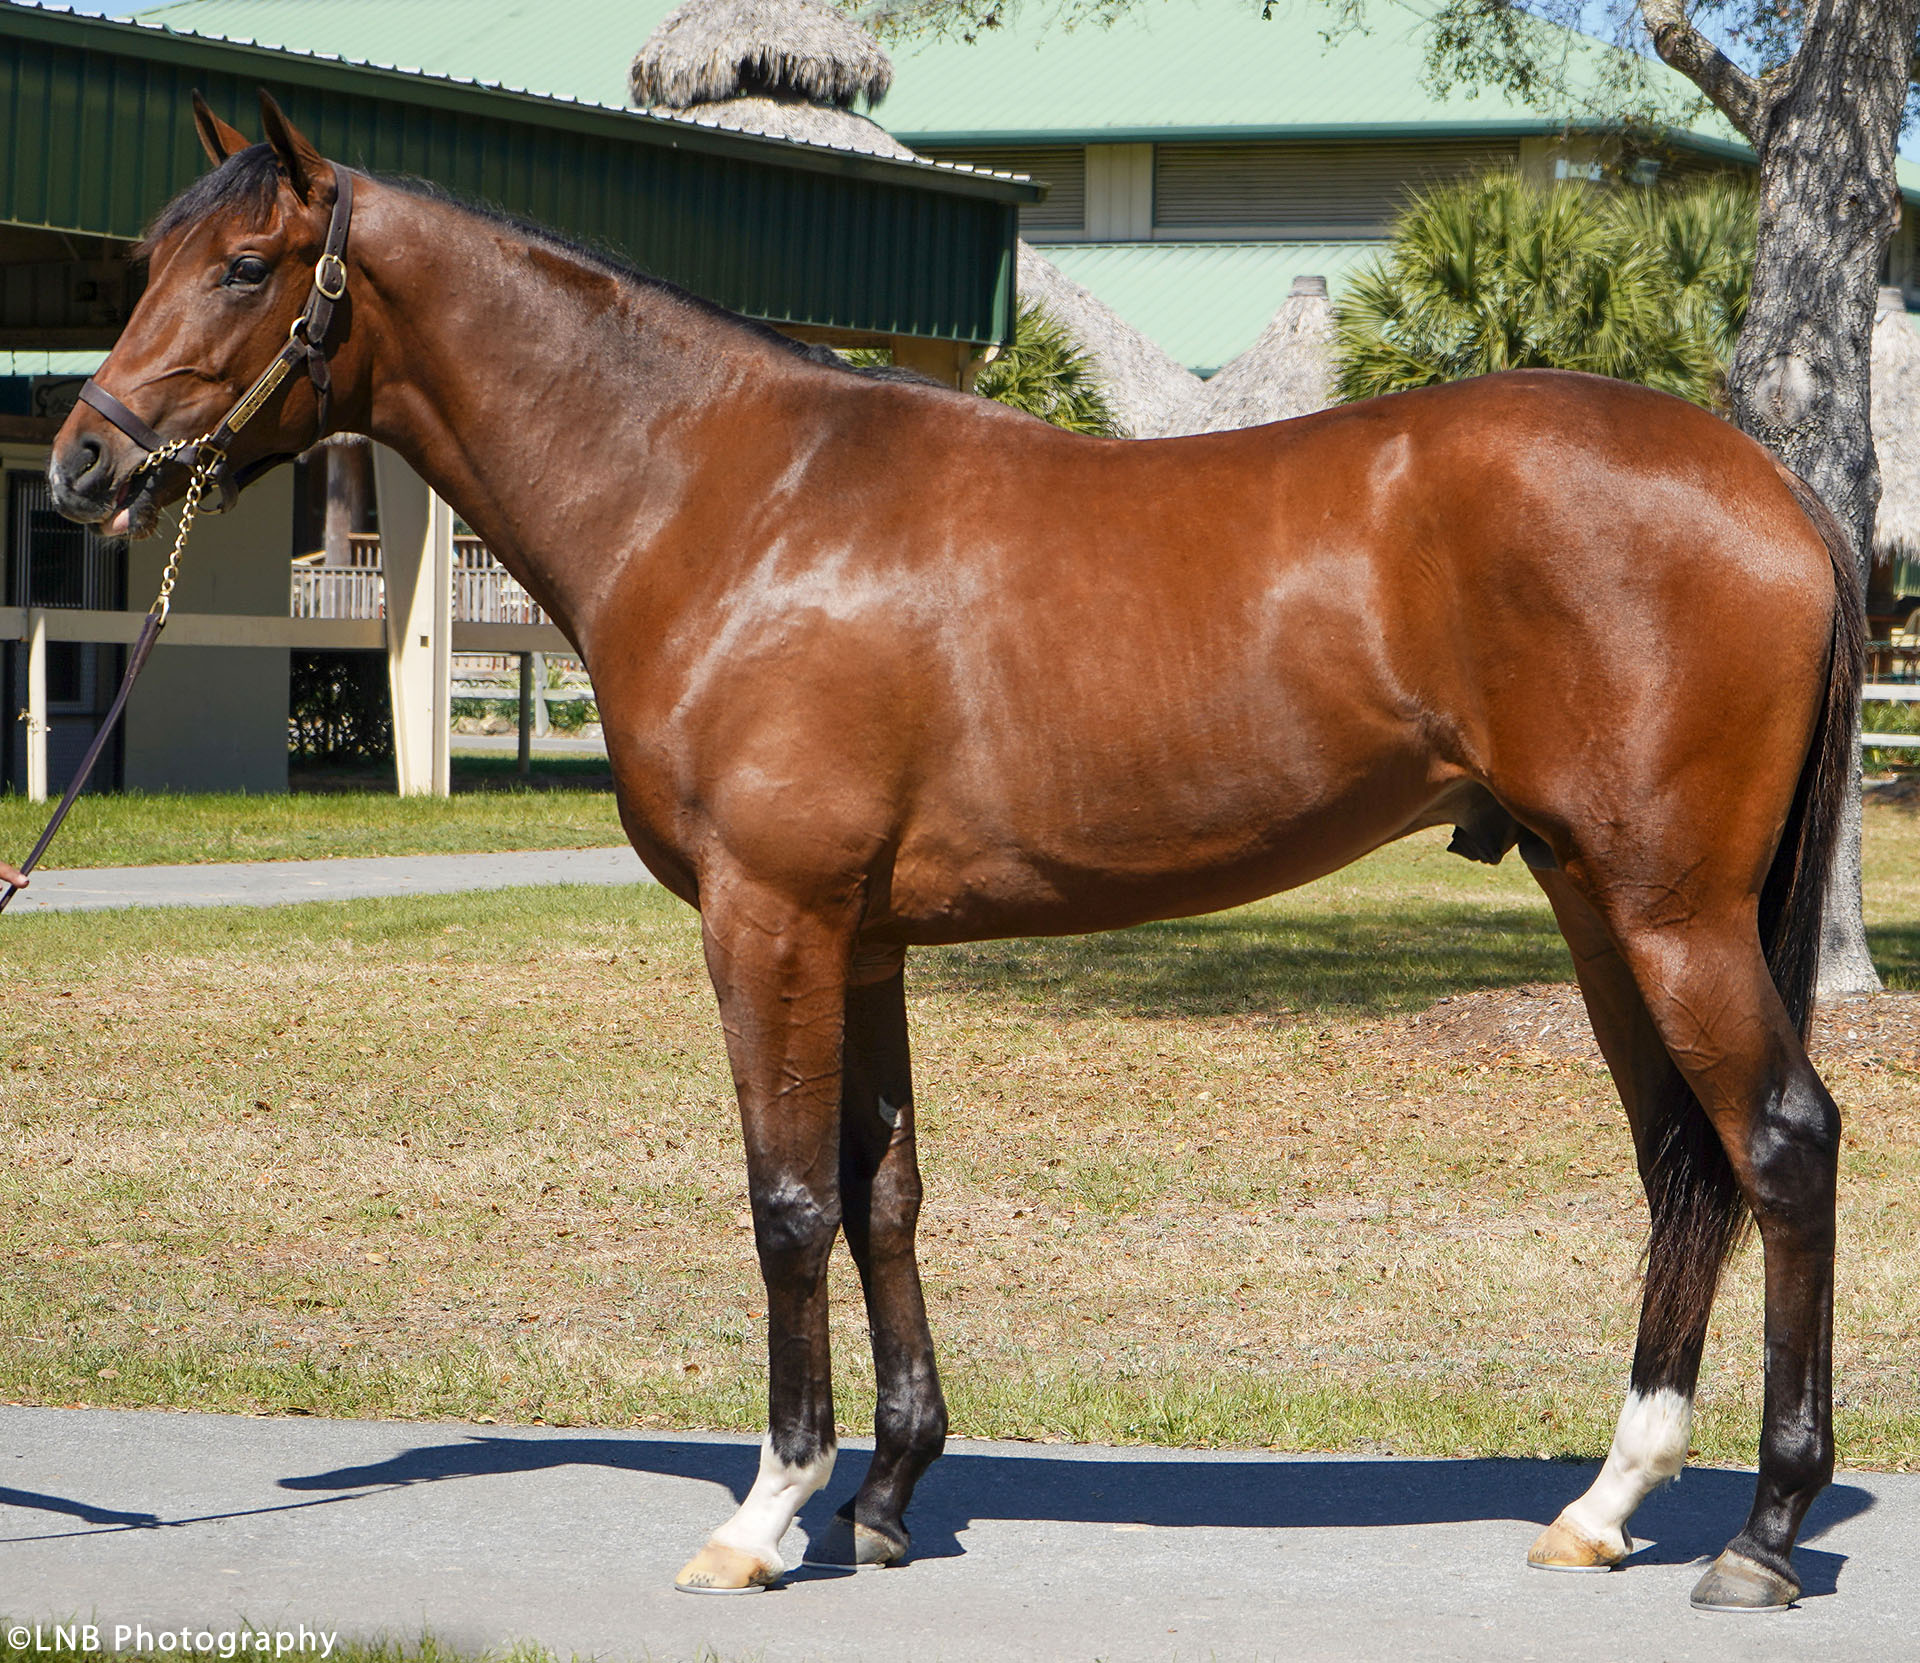 War Officer, a War Front colt out of the stakes placed Galileo mare Claire de Lune. Purchased at the OBS March Sale and available as part of the Twin Oaks LLC thoroughbred racing partnership.